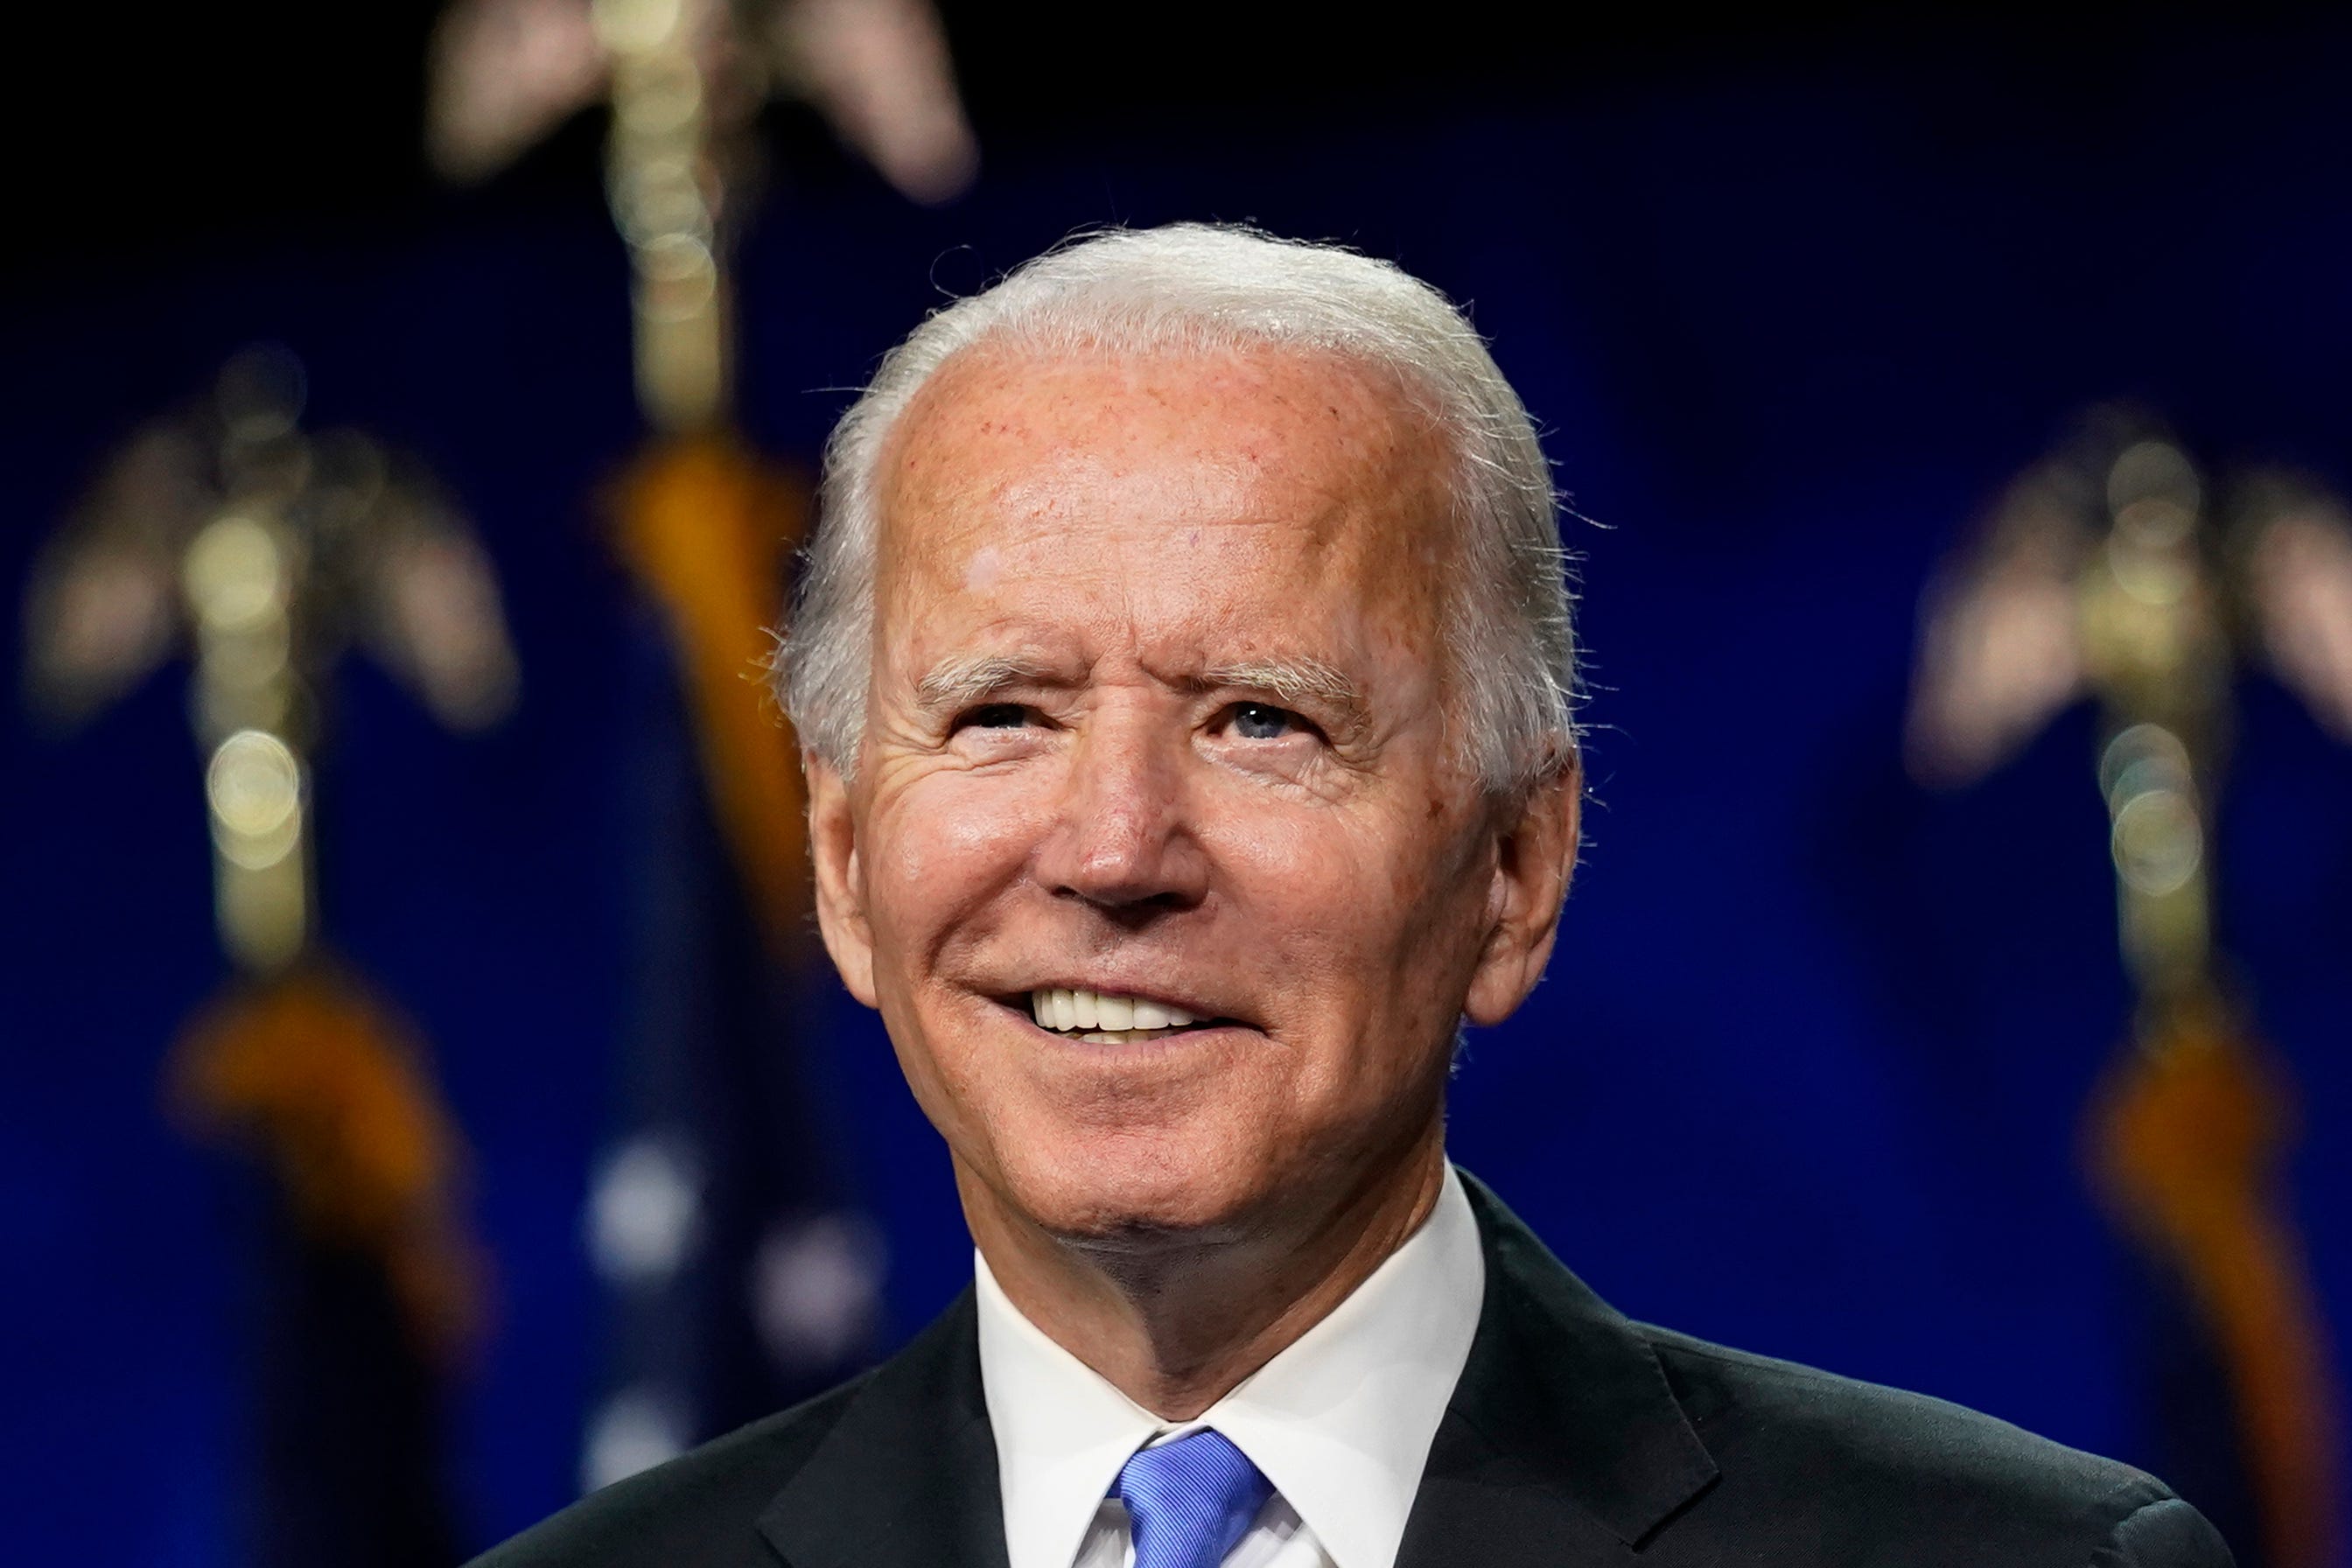 top joe biden memes 2016 - Biden|President|Joe|States|Delaware|Obama|Vice|Senate|Campaign|Election|Time|Administration|House|Law|People|Years|Family|Year|Trump|School|University|Senator|Office|Party|Country|Committee|Act|War|Days|Climate|Hunter|Health|America|State|Day|Democrats|Americans|Documents|Care|Plan|United States|Vice President|White House|Joe Biden|Biden Administration|Democratic Party|Law School|Presidential Election|President Joe Biden|Executive Orders|Foreign Relations Committee|Presidential Campaign|Second Term|47Th Vice President|Syracuse University|Climate Change|Hillary Clinton|Last Year|Barack Obama|Joseph Robinette Biden|U.S. Senator|Health Care|U.S. Senate|Donald Trump|President Trump|President Biden|Federal Register|Judiciary Committee|Presidential Nomination|Presidential Medal